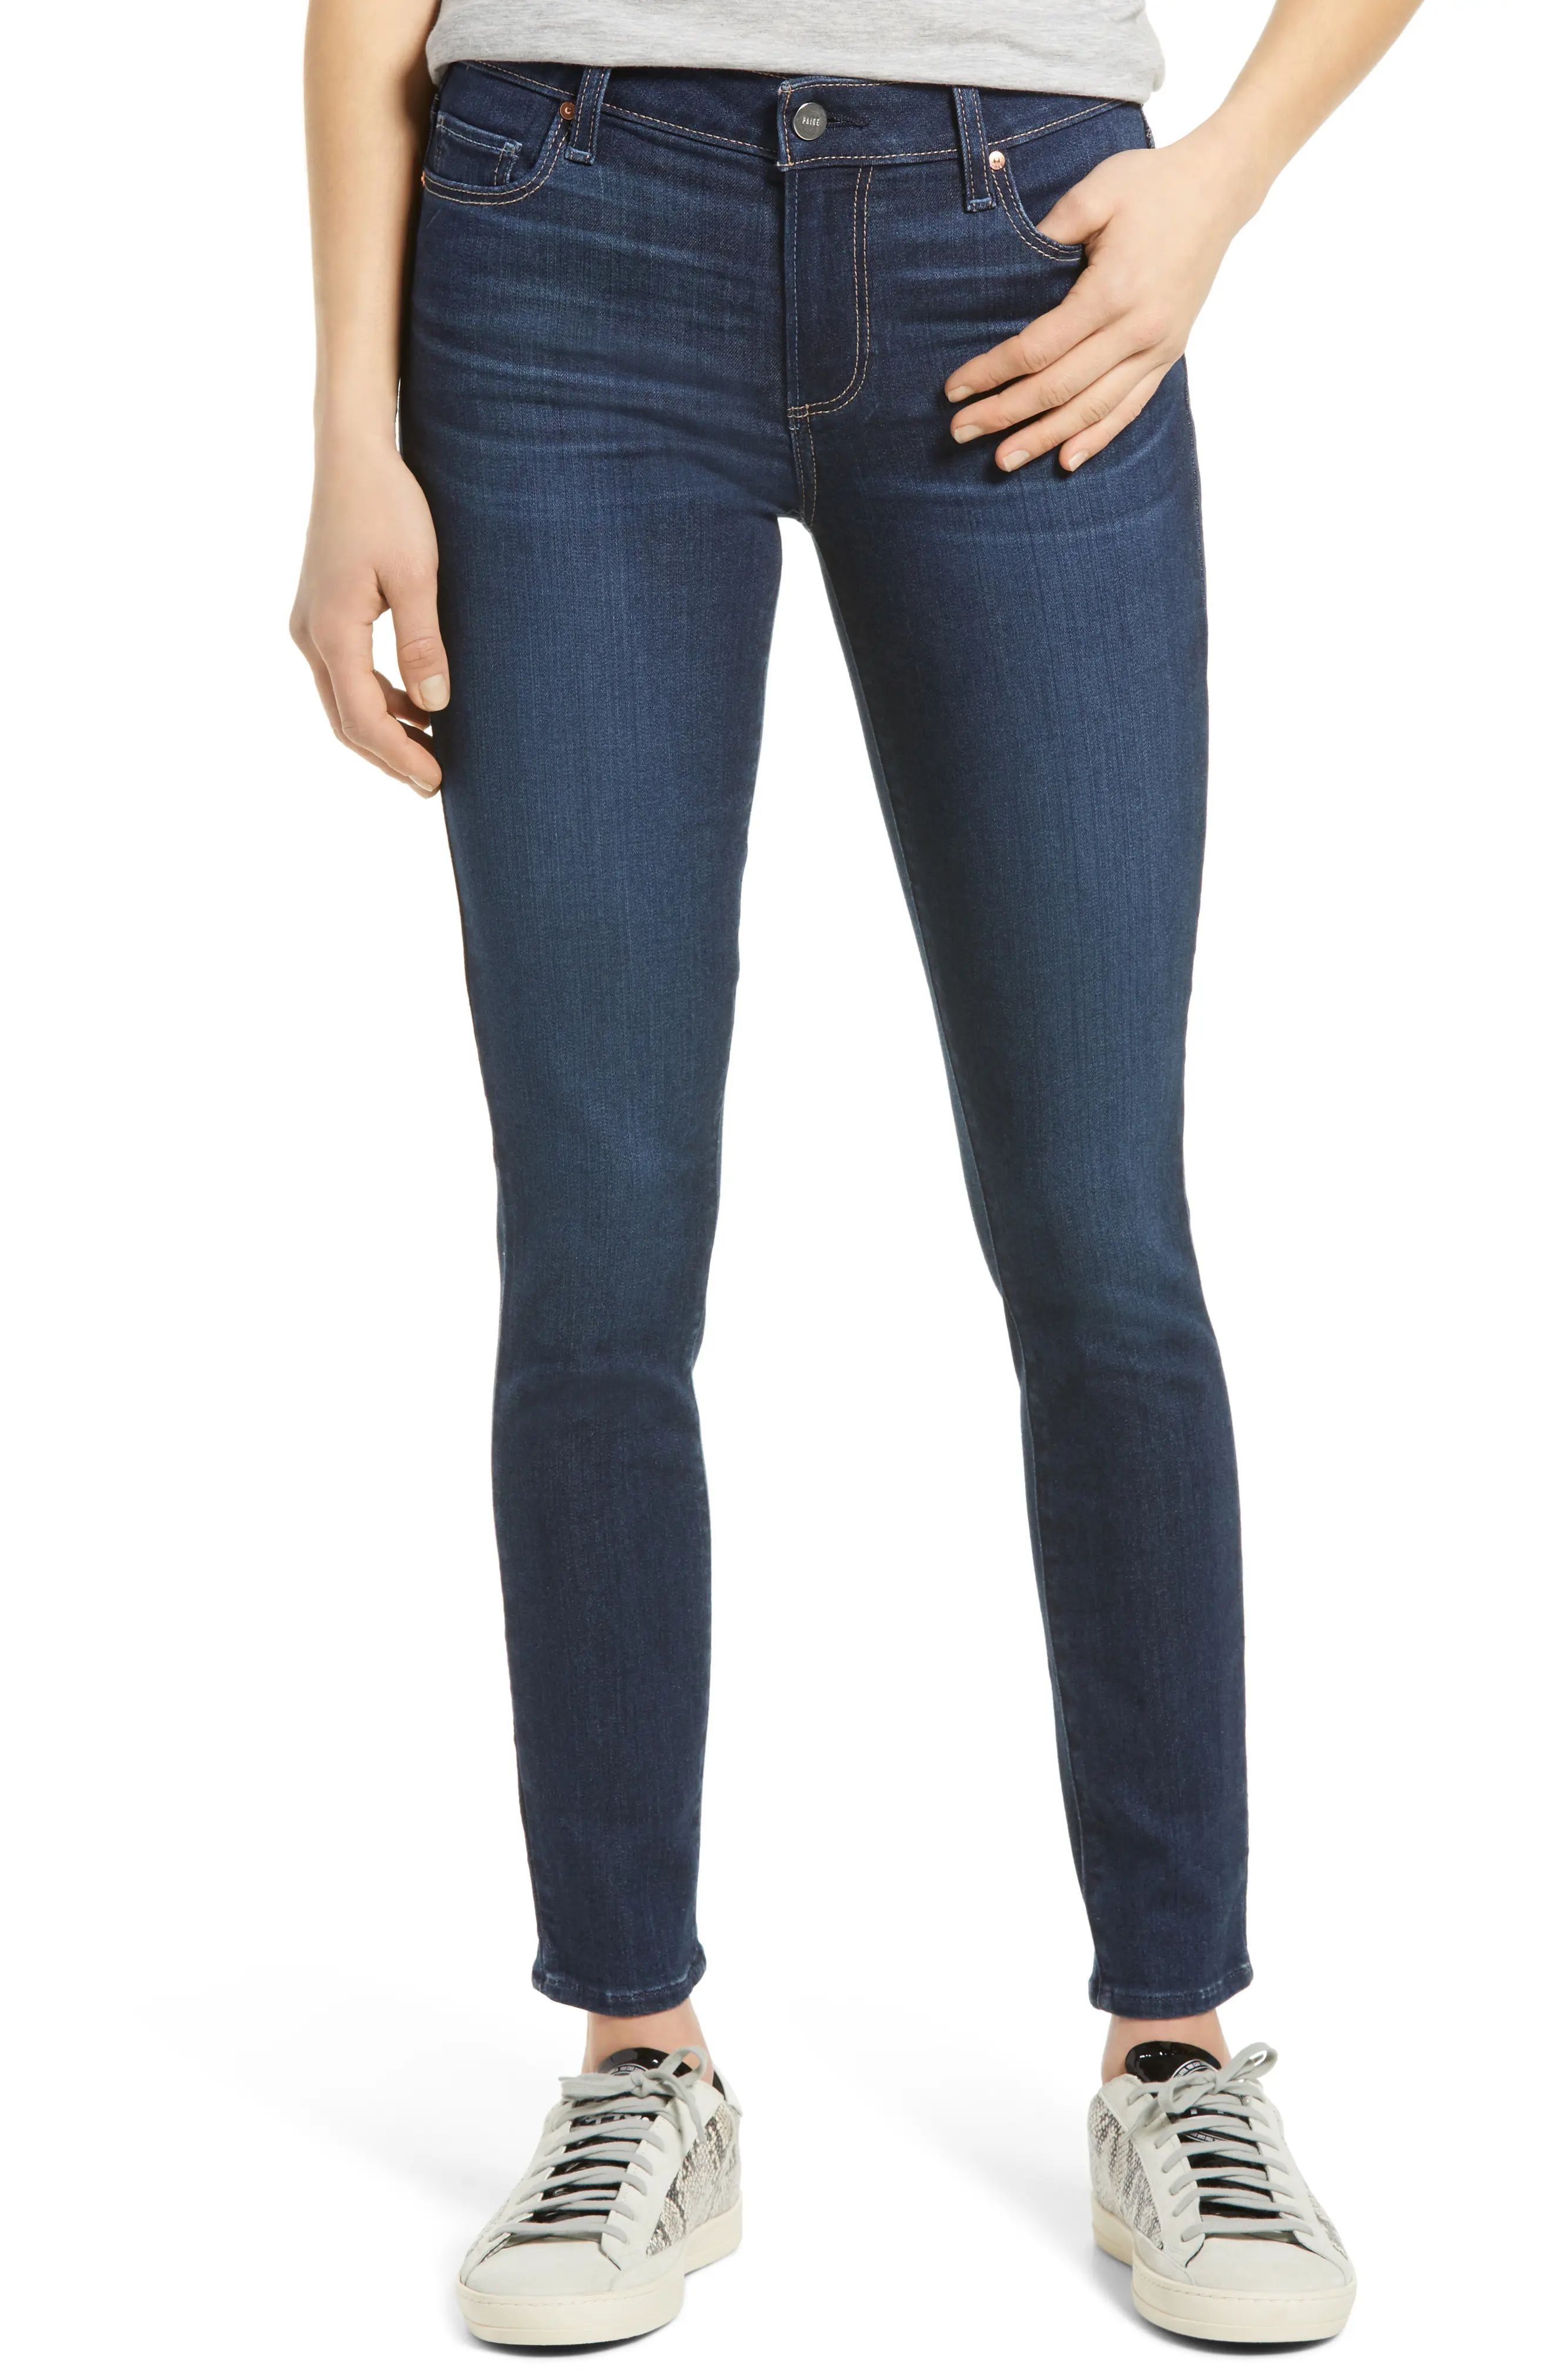 PAIGE Verdugo Ankle Ultra Skinny Jeans in Marrakech at Nordstrom, Size 32 | Nordstrom